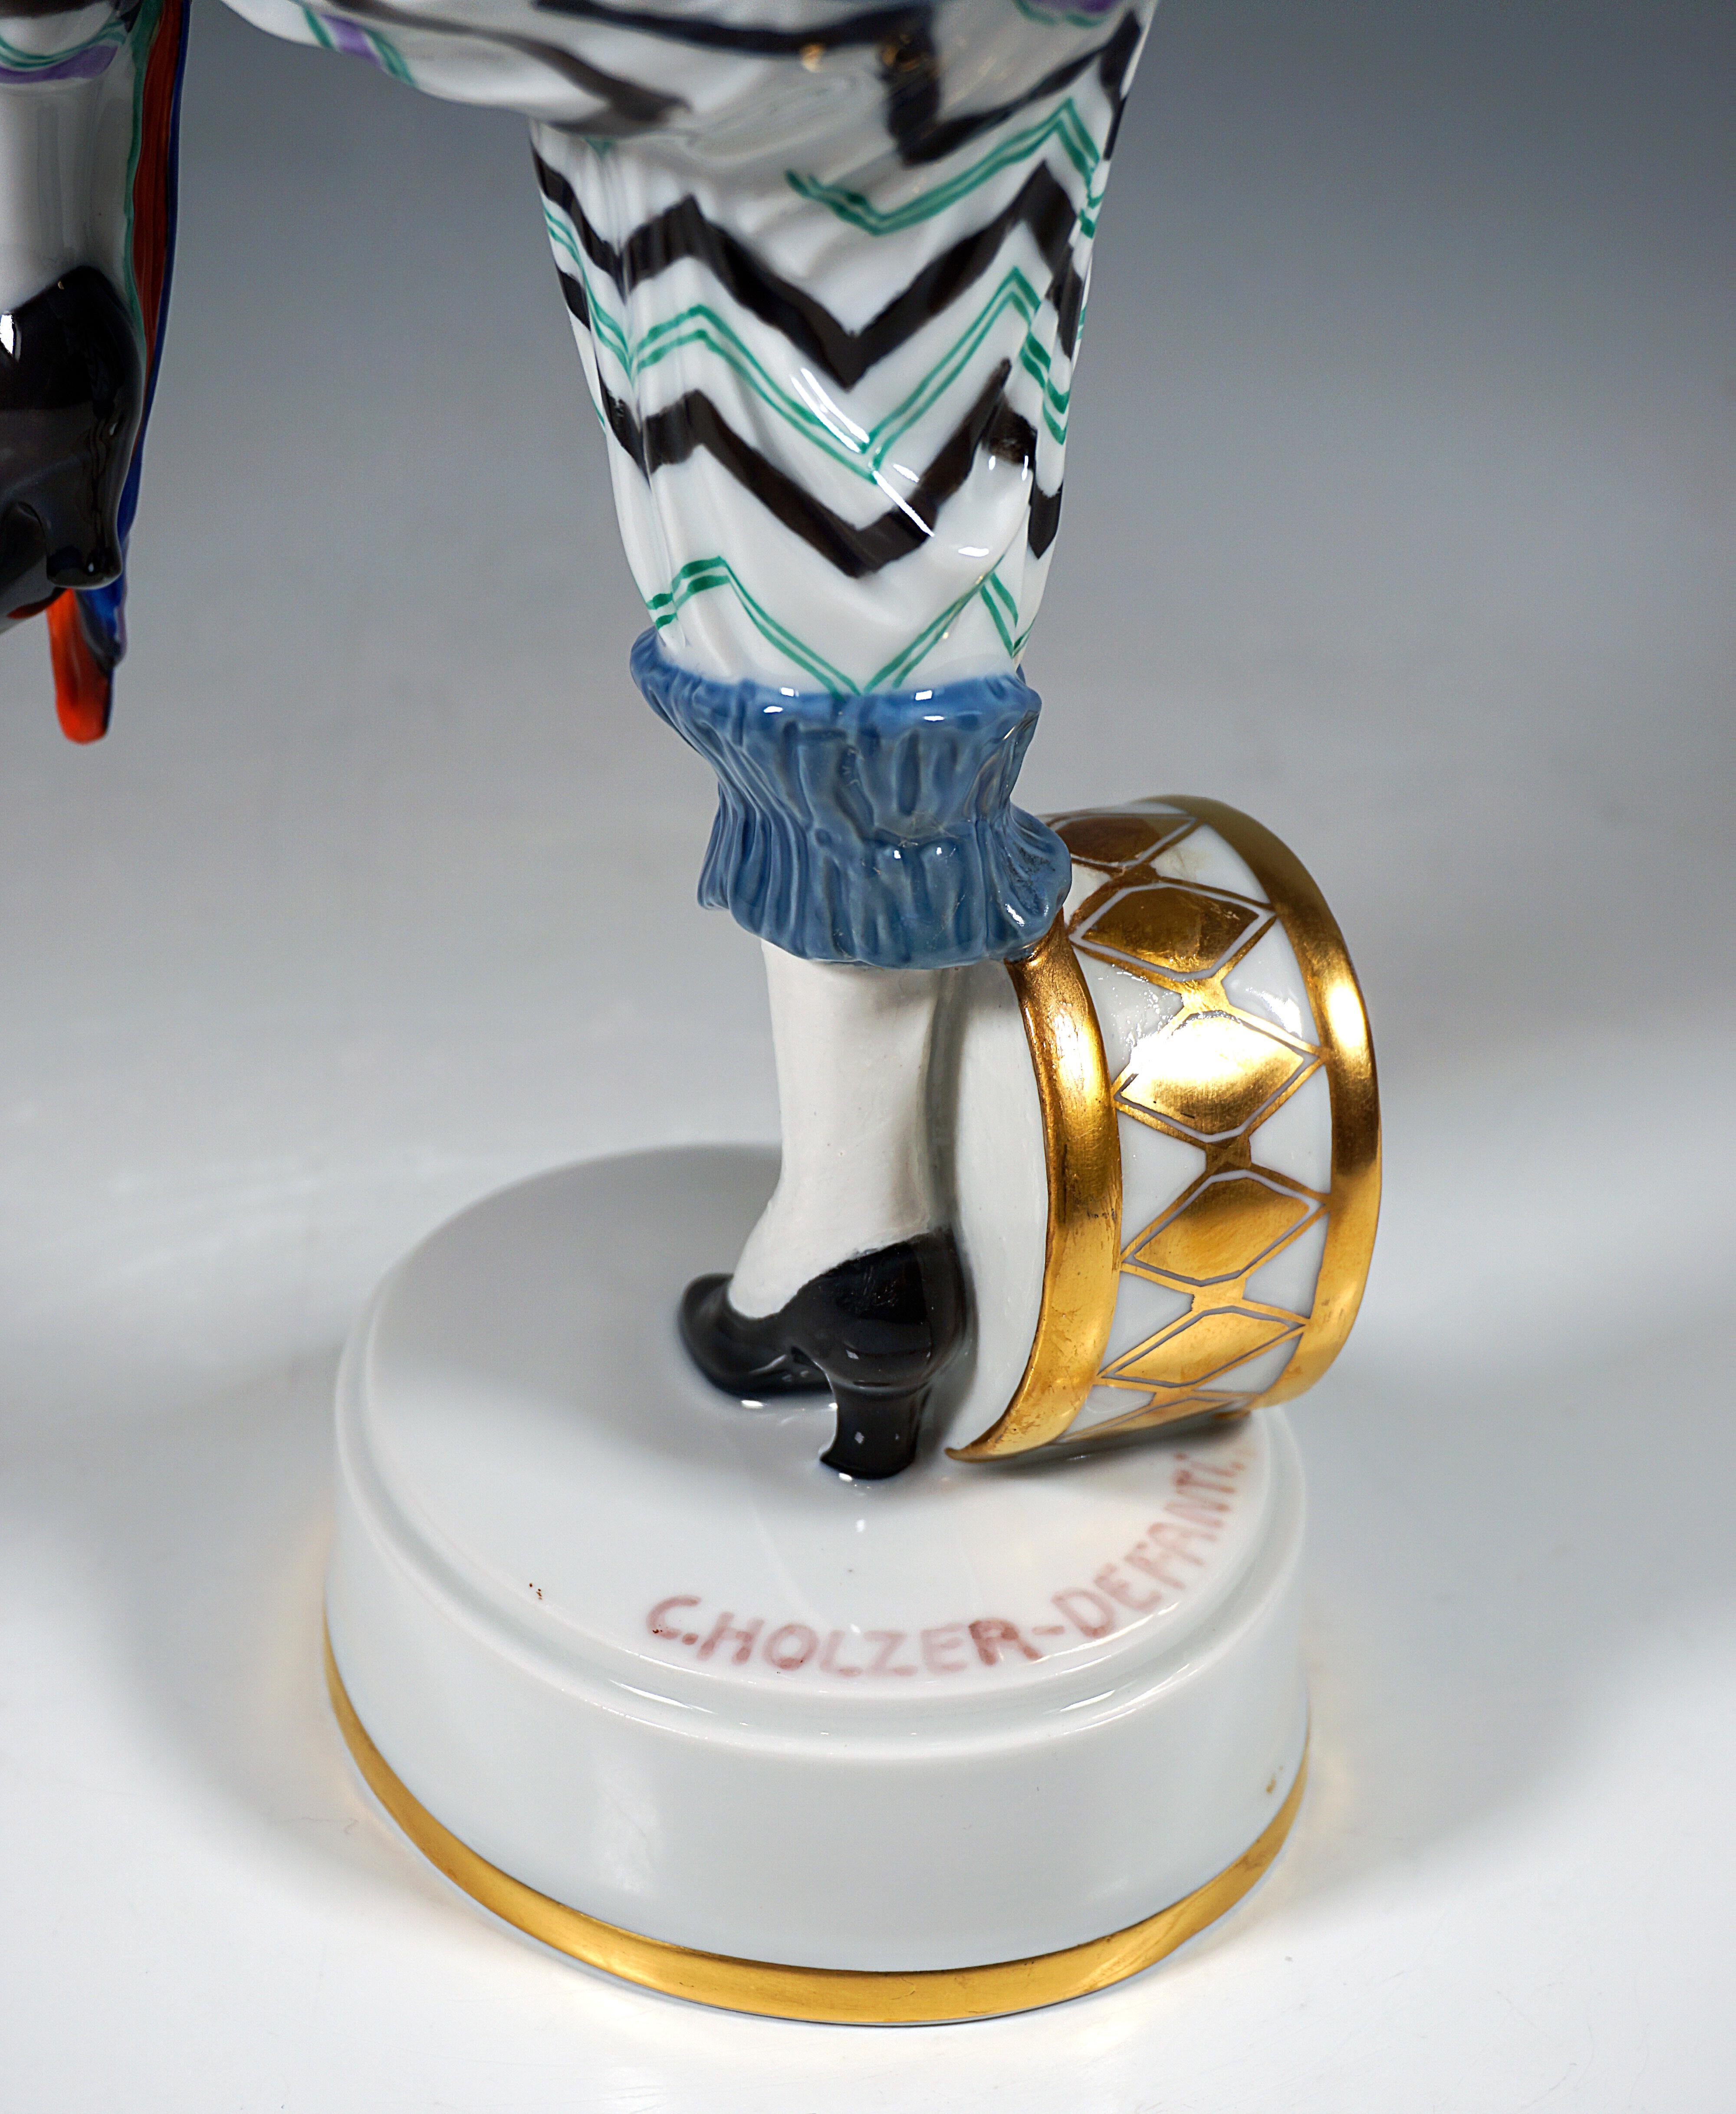 Early 20th Century Art Déco Porcelain Figurine 'Merry March', C. Holzer-Defanti, Rosenthal Germany